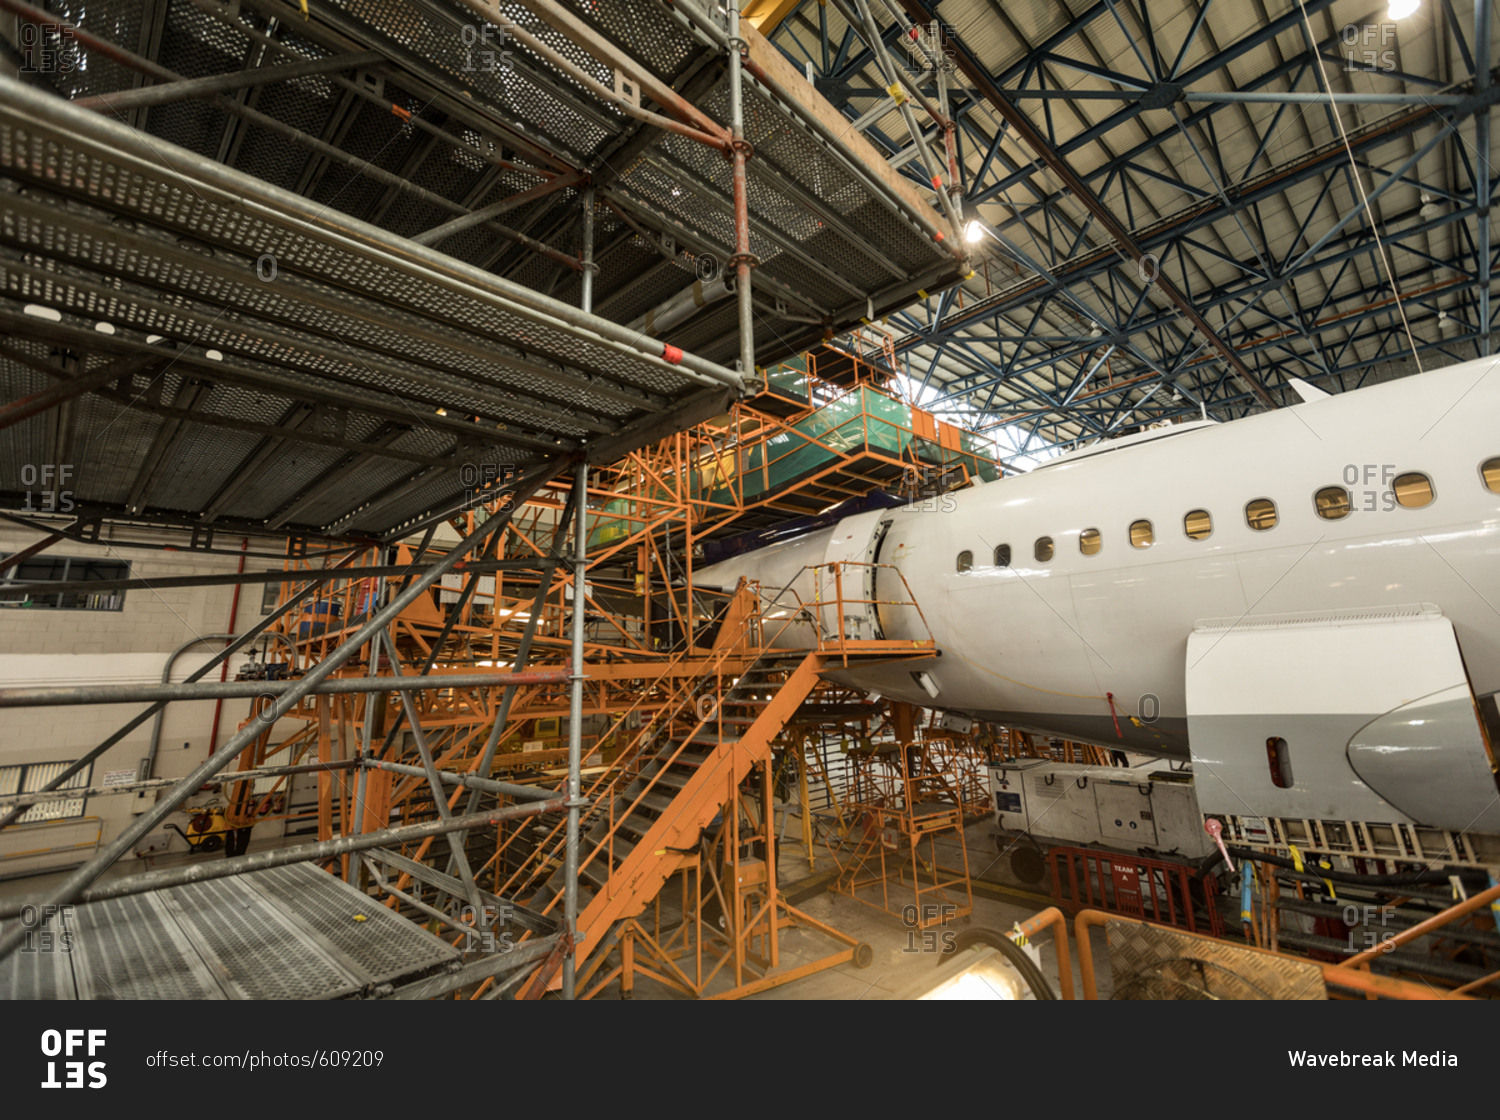 Aircraft for servicing at airlines maintenance facility